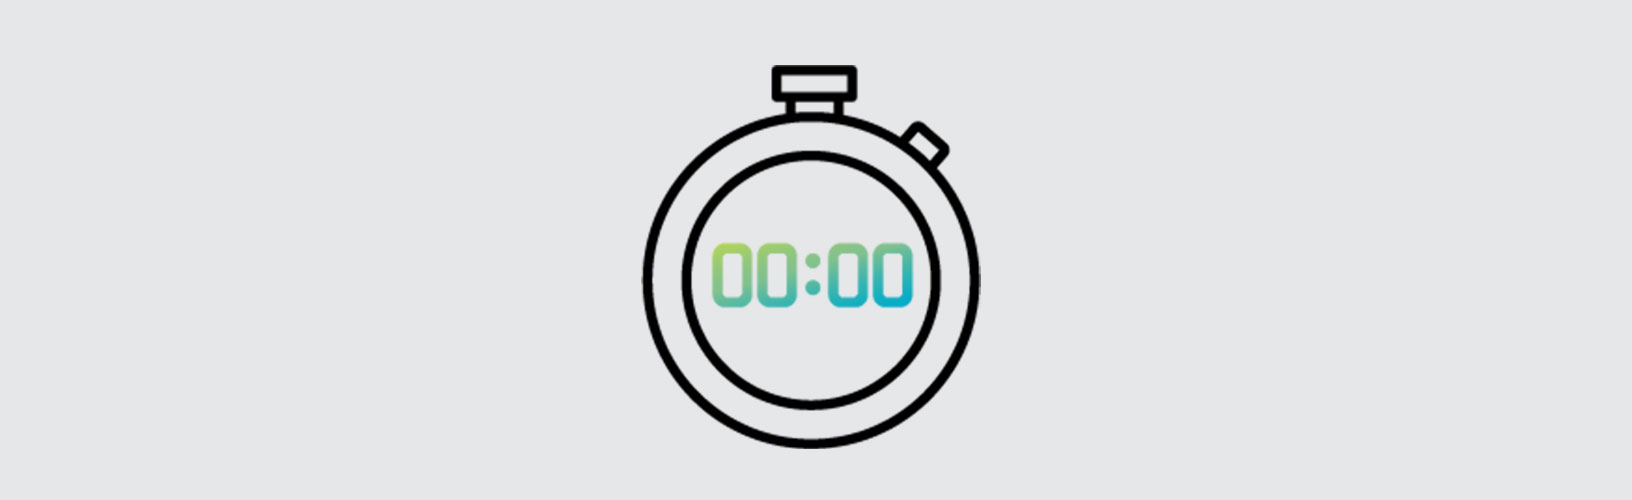 Hexagon-branded icon representing a timing (a stopwatch)